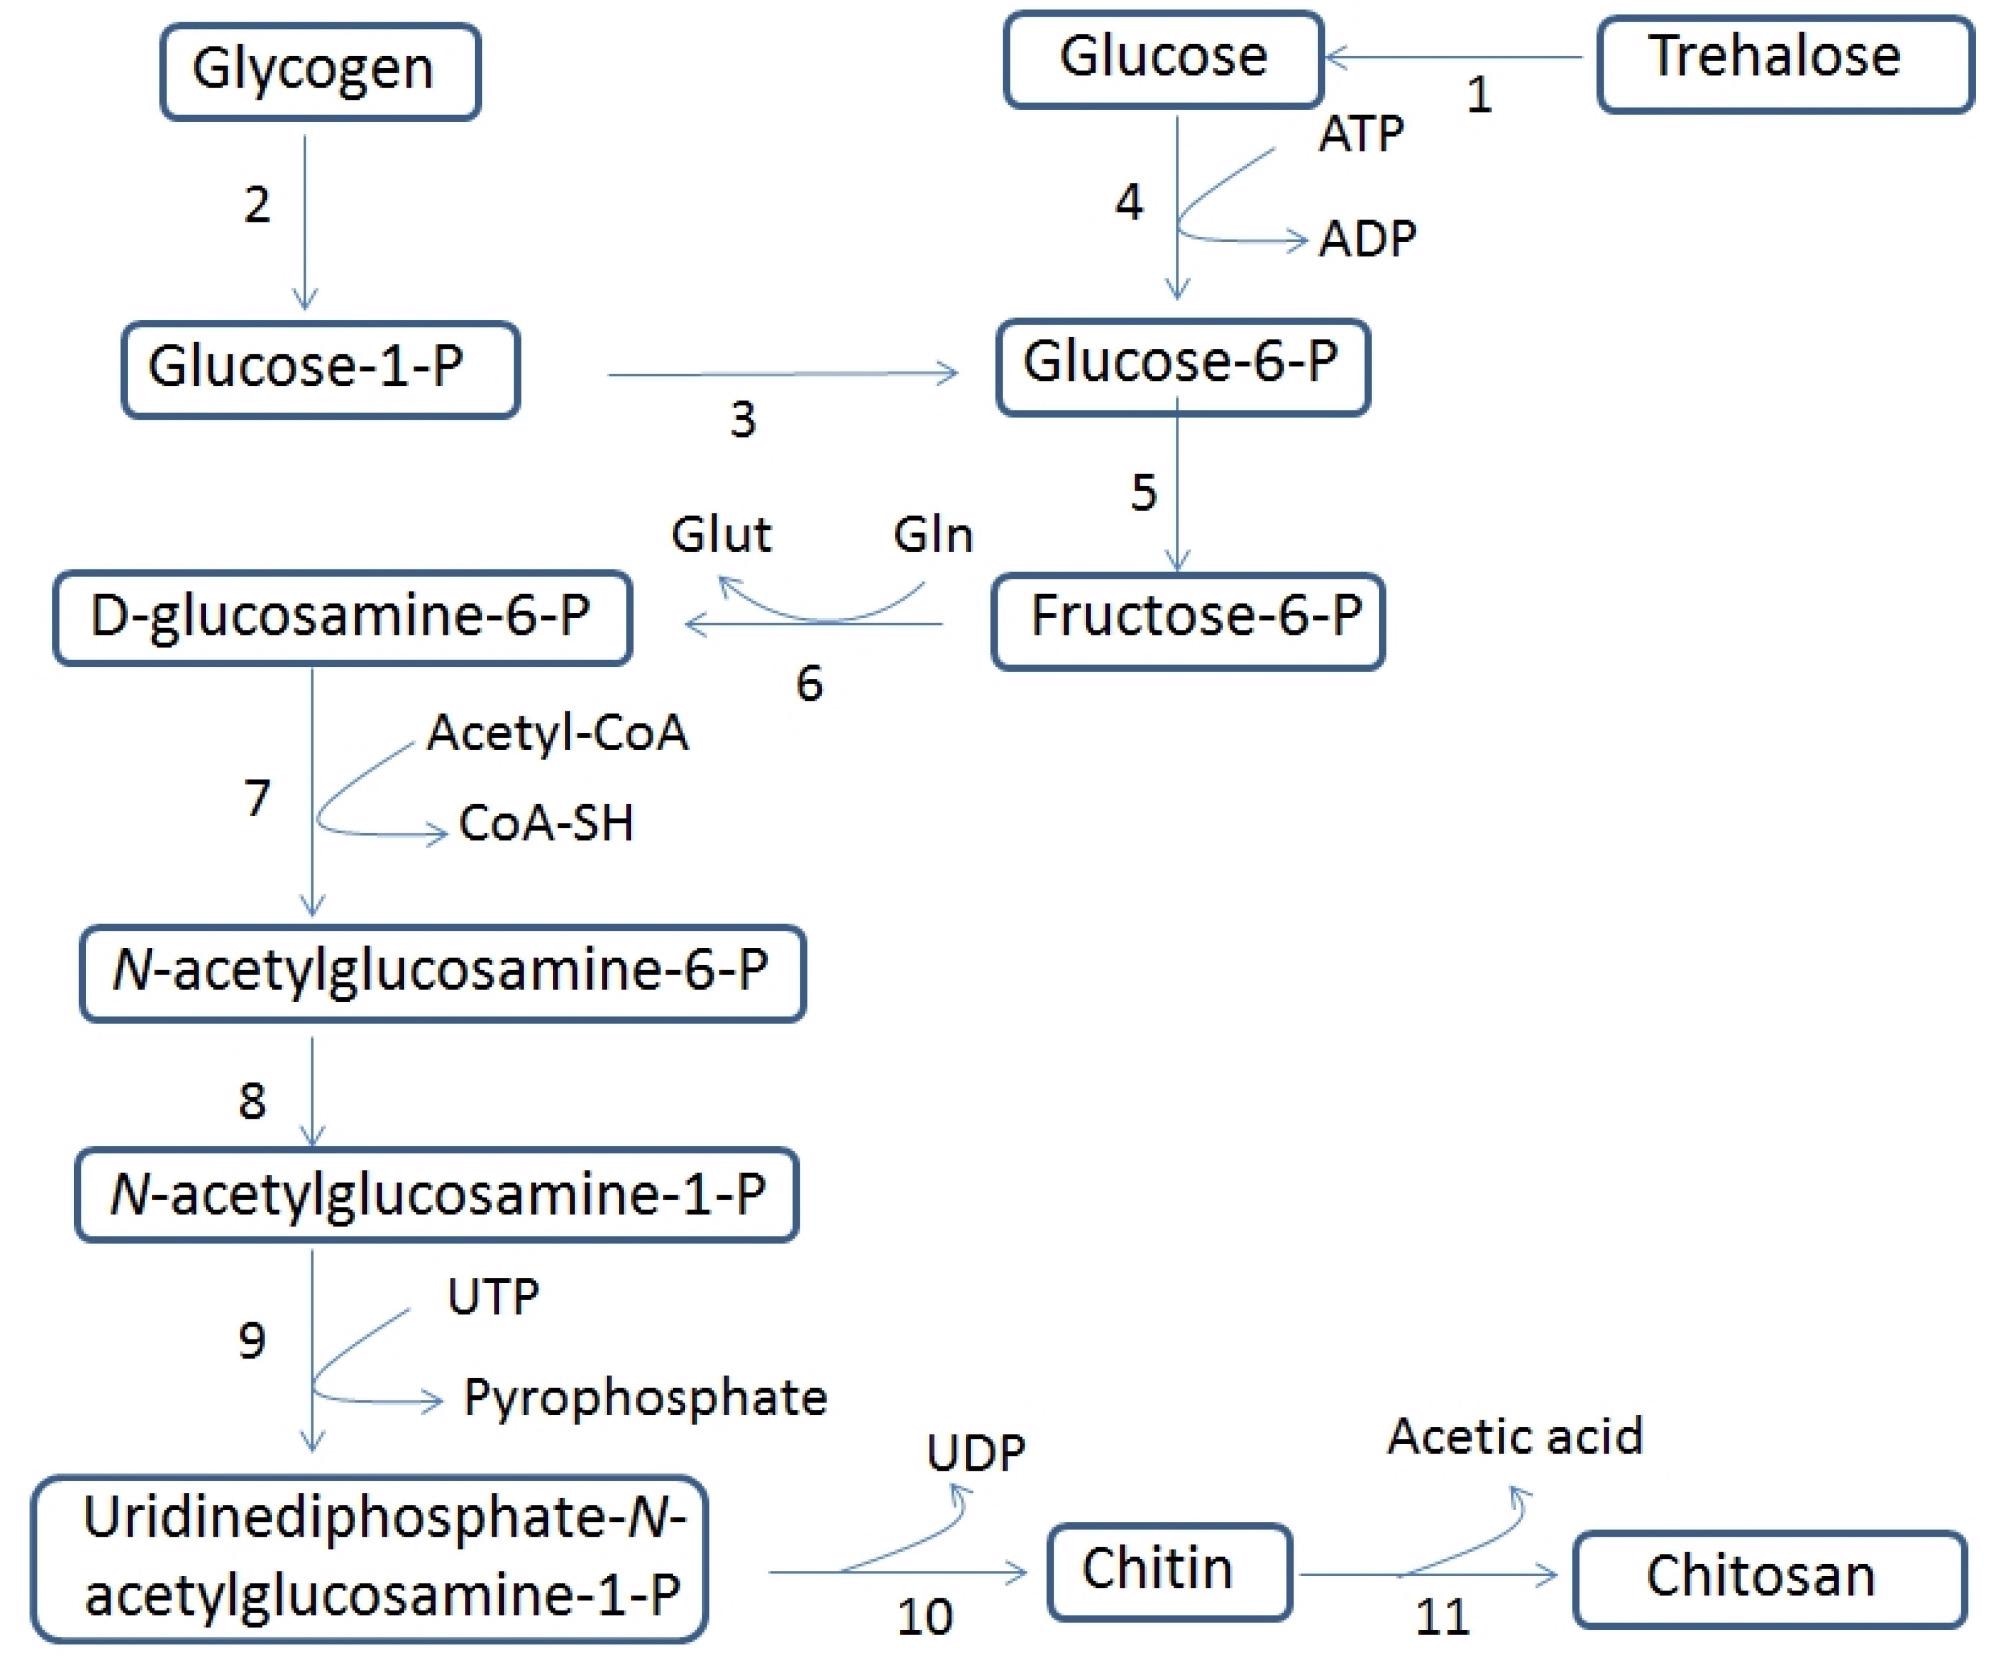 Biosynthetic pathway of chitin and chitosan. The following numbering has been assigned to the enzymes that catalyze each reaction: 1, trehalase; 2, glycogen phosphorylase; 3, phosphoglucomutase; 4, hexokinase; 5, glucose-6-phosphate isomerase; 6, glutamine-fructose-6-phosphate amidotransferase; 7, glucosamine-6-phosphate N-acetyltransferase; 8, N-acetylglucosamine-phosphate mutase; 9, UDP-N-acetylglucosamine pyrophosphorylase; 10, chitin synthase and 11, chitin deacetylase. The abbreviations used are as follows: acetyl CoA, acetyl coenzyme A; ADP, adenosine diphosphate; CoASH, coenzyme A; Gln, L-glutamine; Glu, L-glutamate; UDP, uridine diphosphate; UTP, uridine triphosphate.